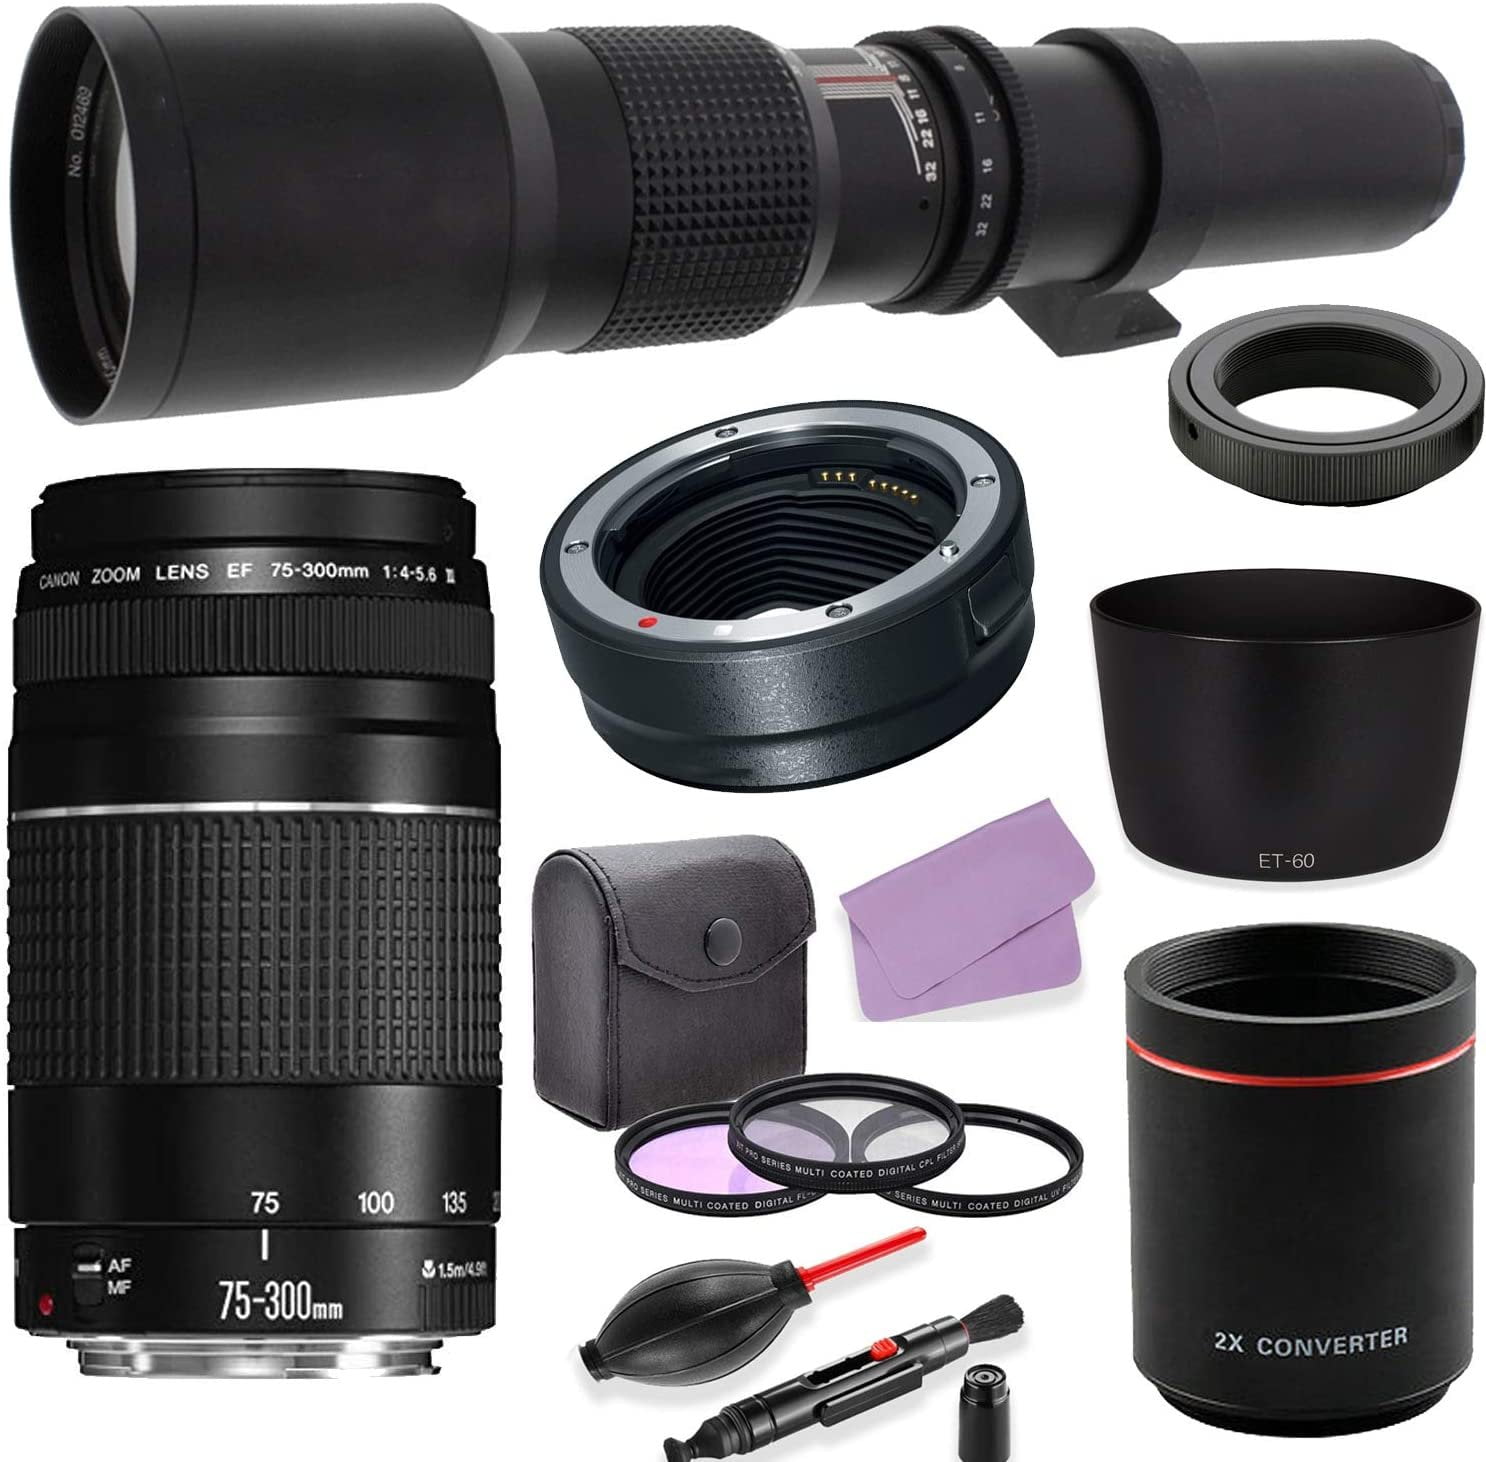 Canon EF 75-300mm f/4-5.6 III Lens + 500mm (w/ 2X 1000mm) f/8.0 Preset MF  Lens + EOS R Auto Adapter Bundle with HD Filters, PZ ET-60 Hood for Canon 